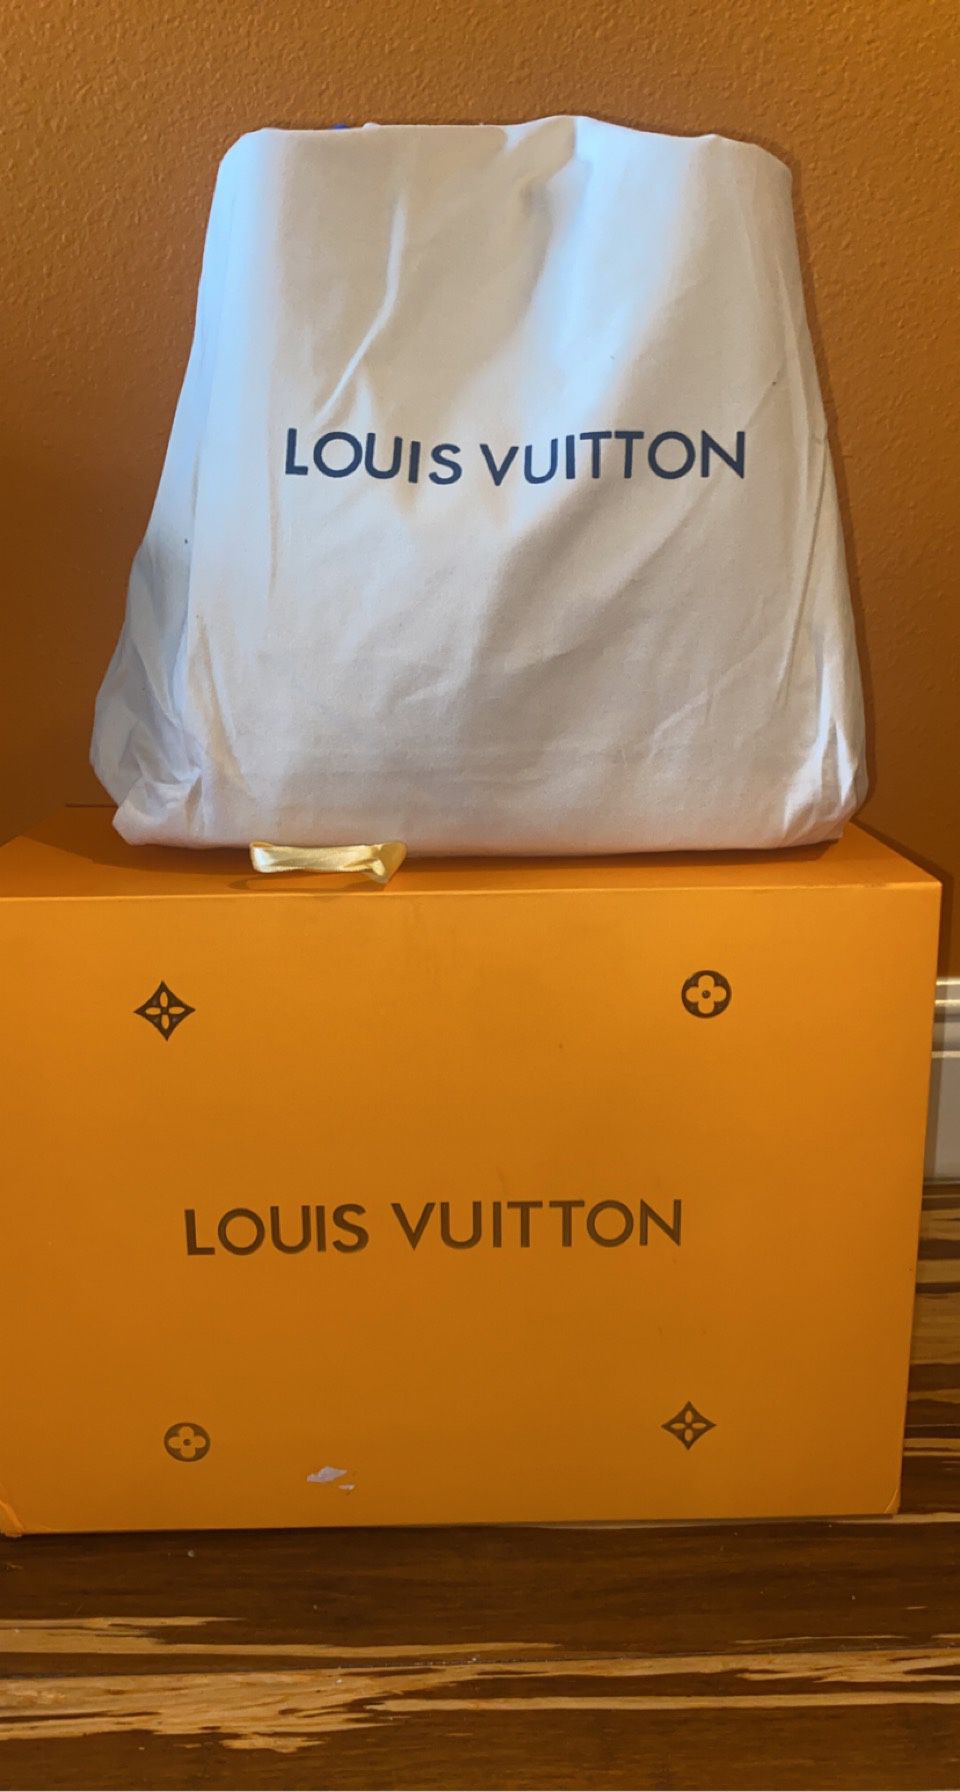 LOUIS VUITTON AUTHENTIC CODE AR1211 for Sale in Indian Shores, FL - OfferUp